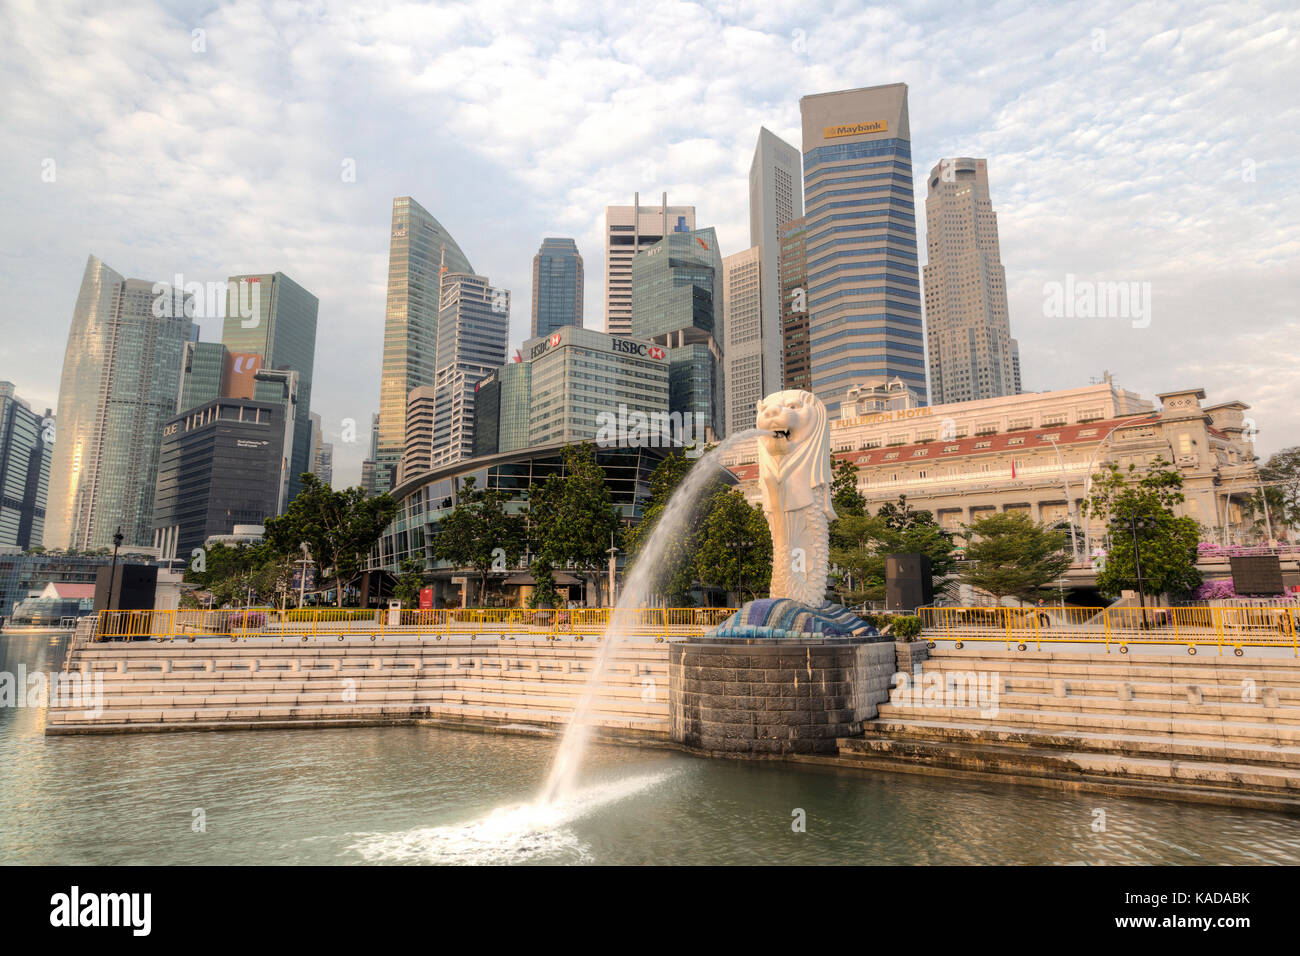 SINGAPORE - SEPTEMBER 11, 2017: Morning sunrise at Marina Bay with the iconic Merlion and the downtown central business district in the background. Th Stock Photo